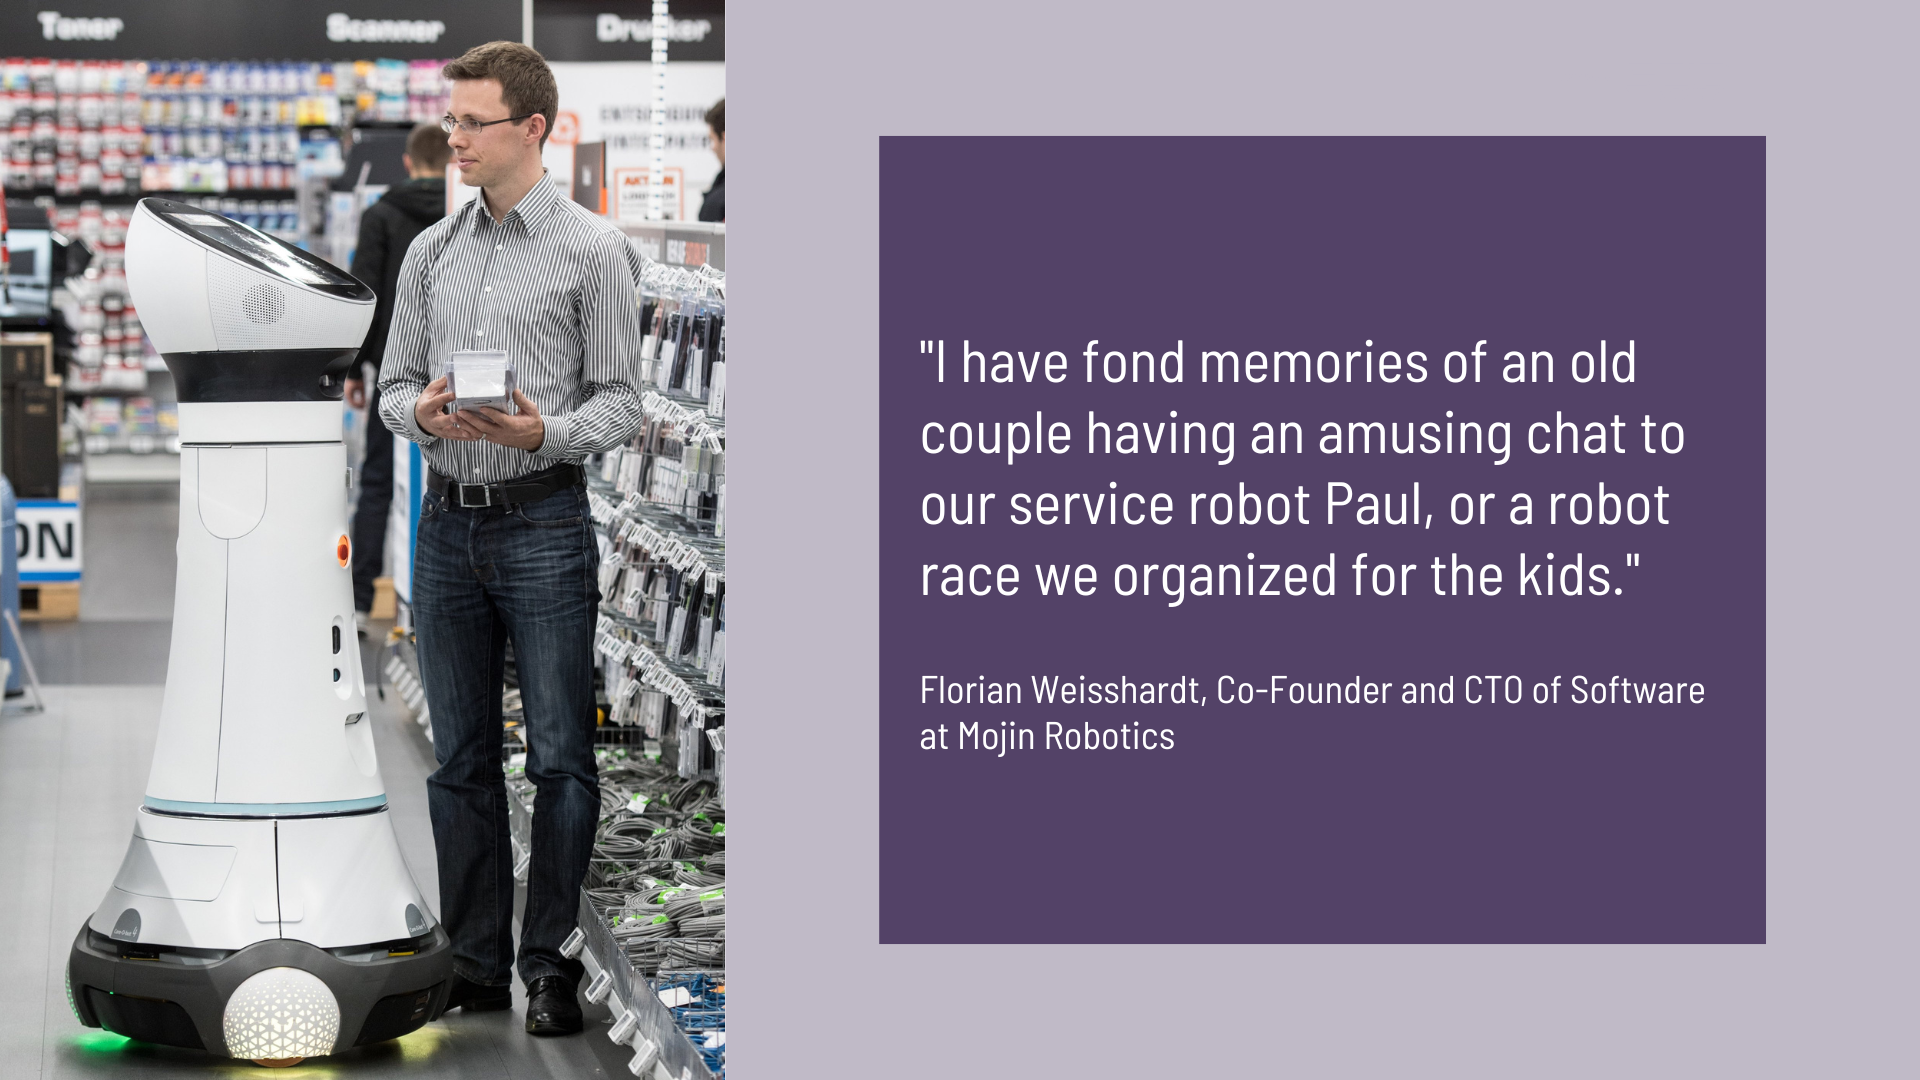 Florian Weisshardt, Co-Founder and CTO of Software at Mojin Robotics